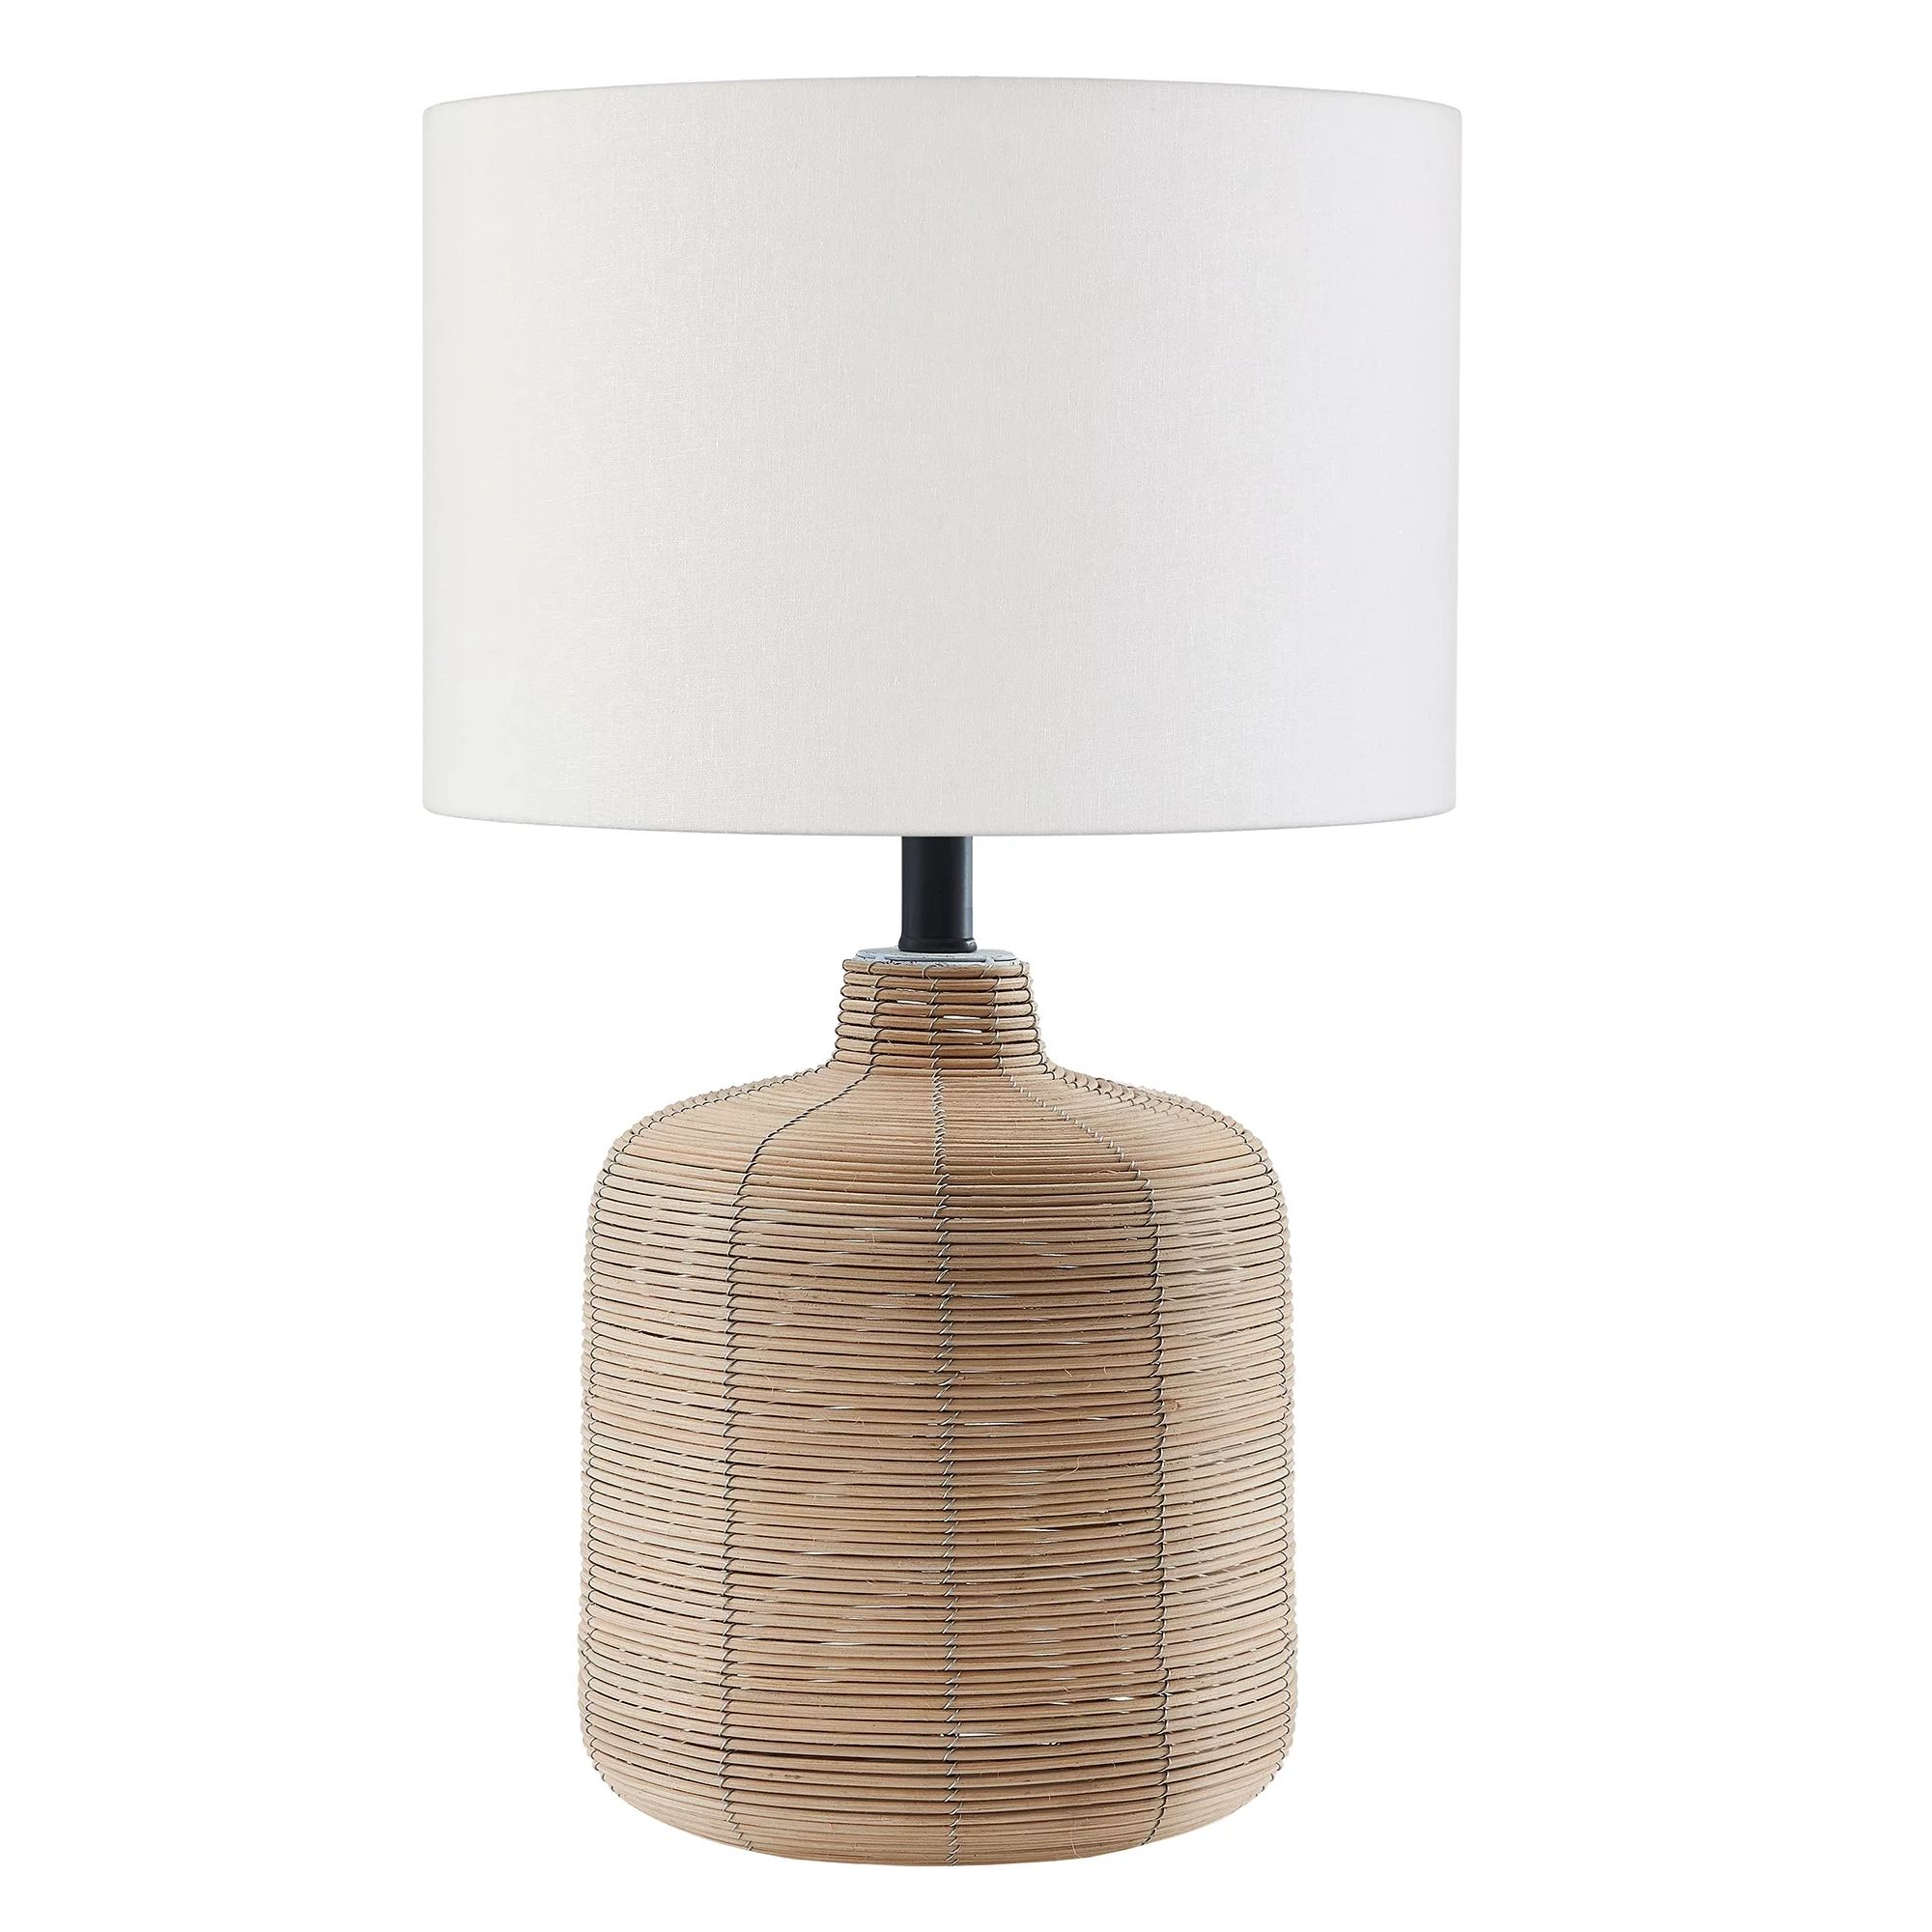 Modern Petite Rattan Table Lamp with Blackened Steel Accents | Walmart (US)